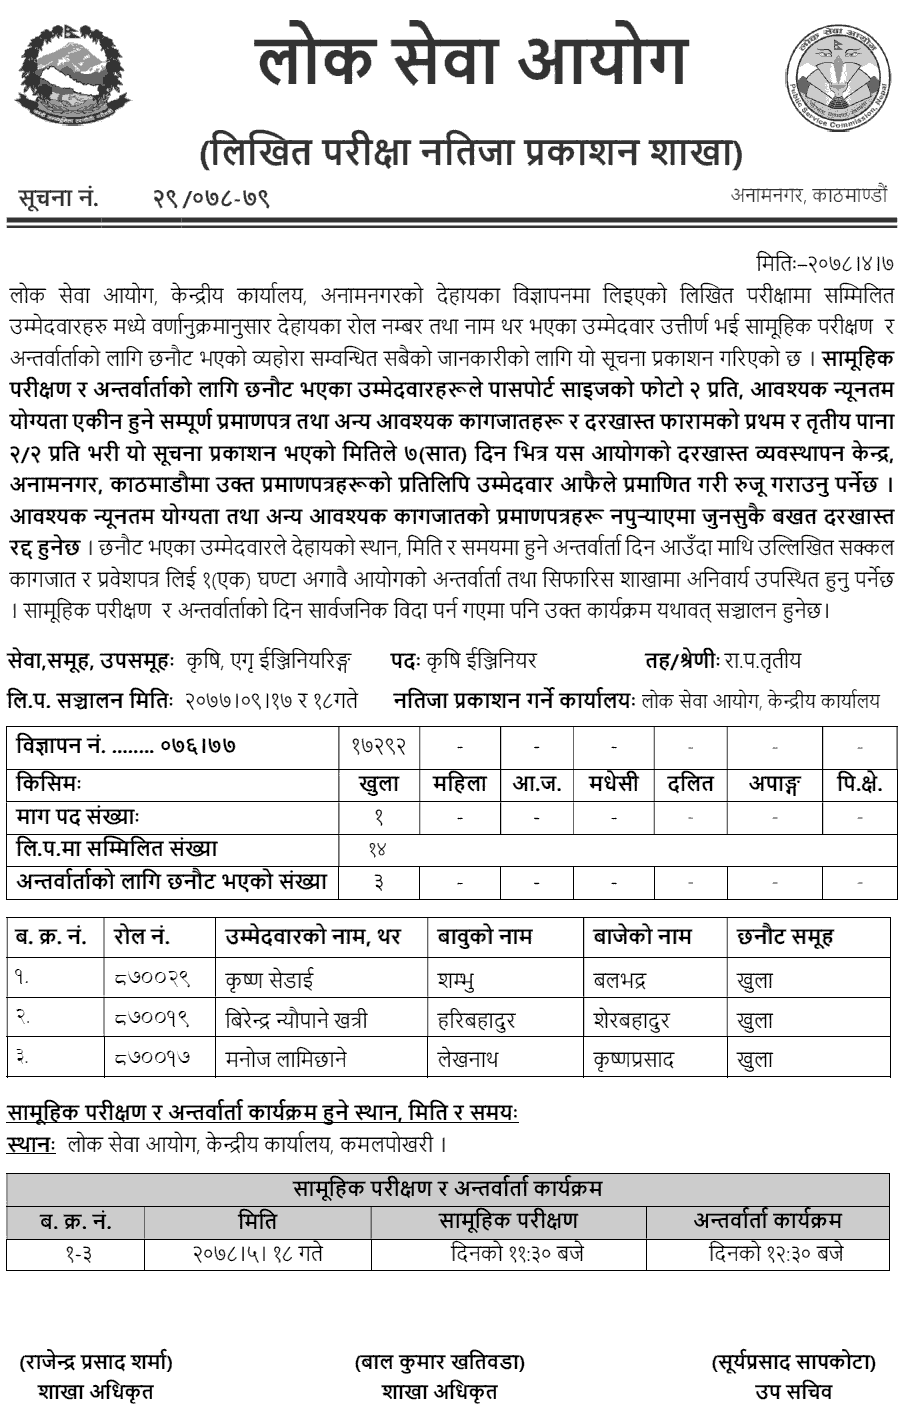 Lok Sewa Aayog Published Written Exam Result of Agricultural Engineer and Veterinarian